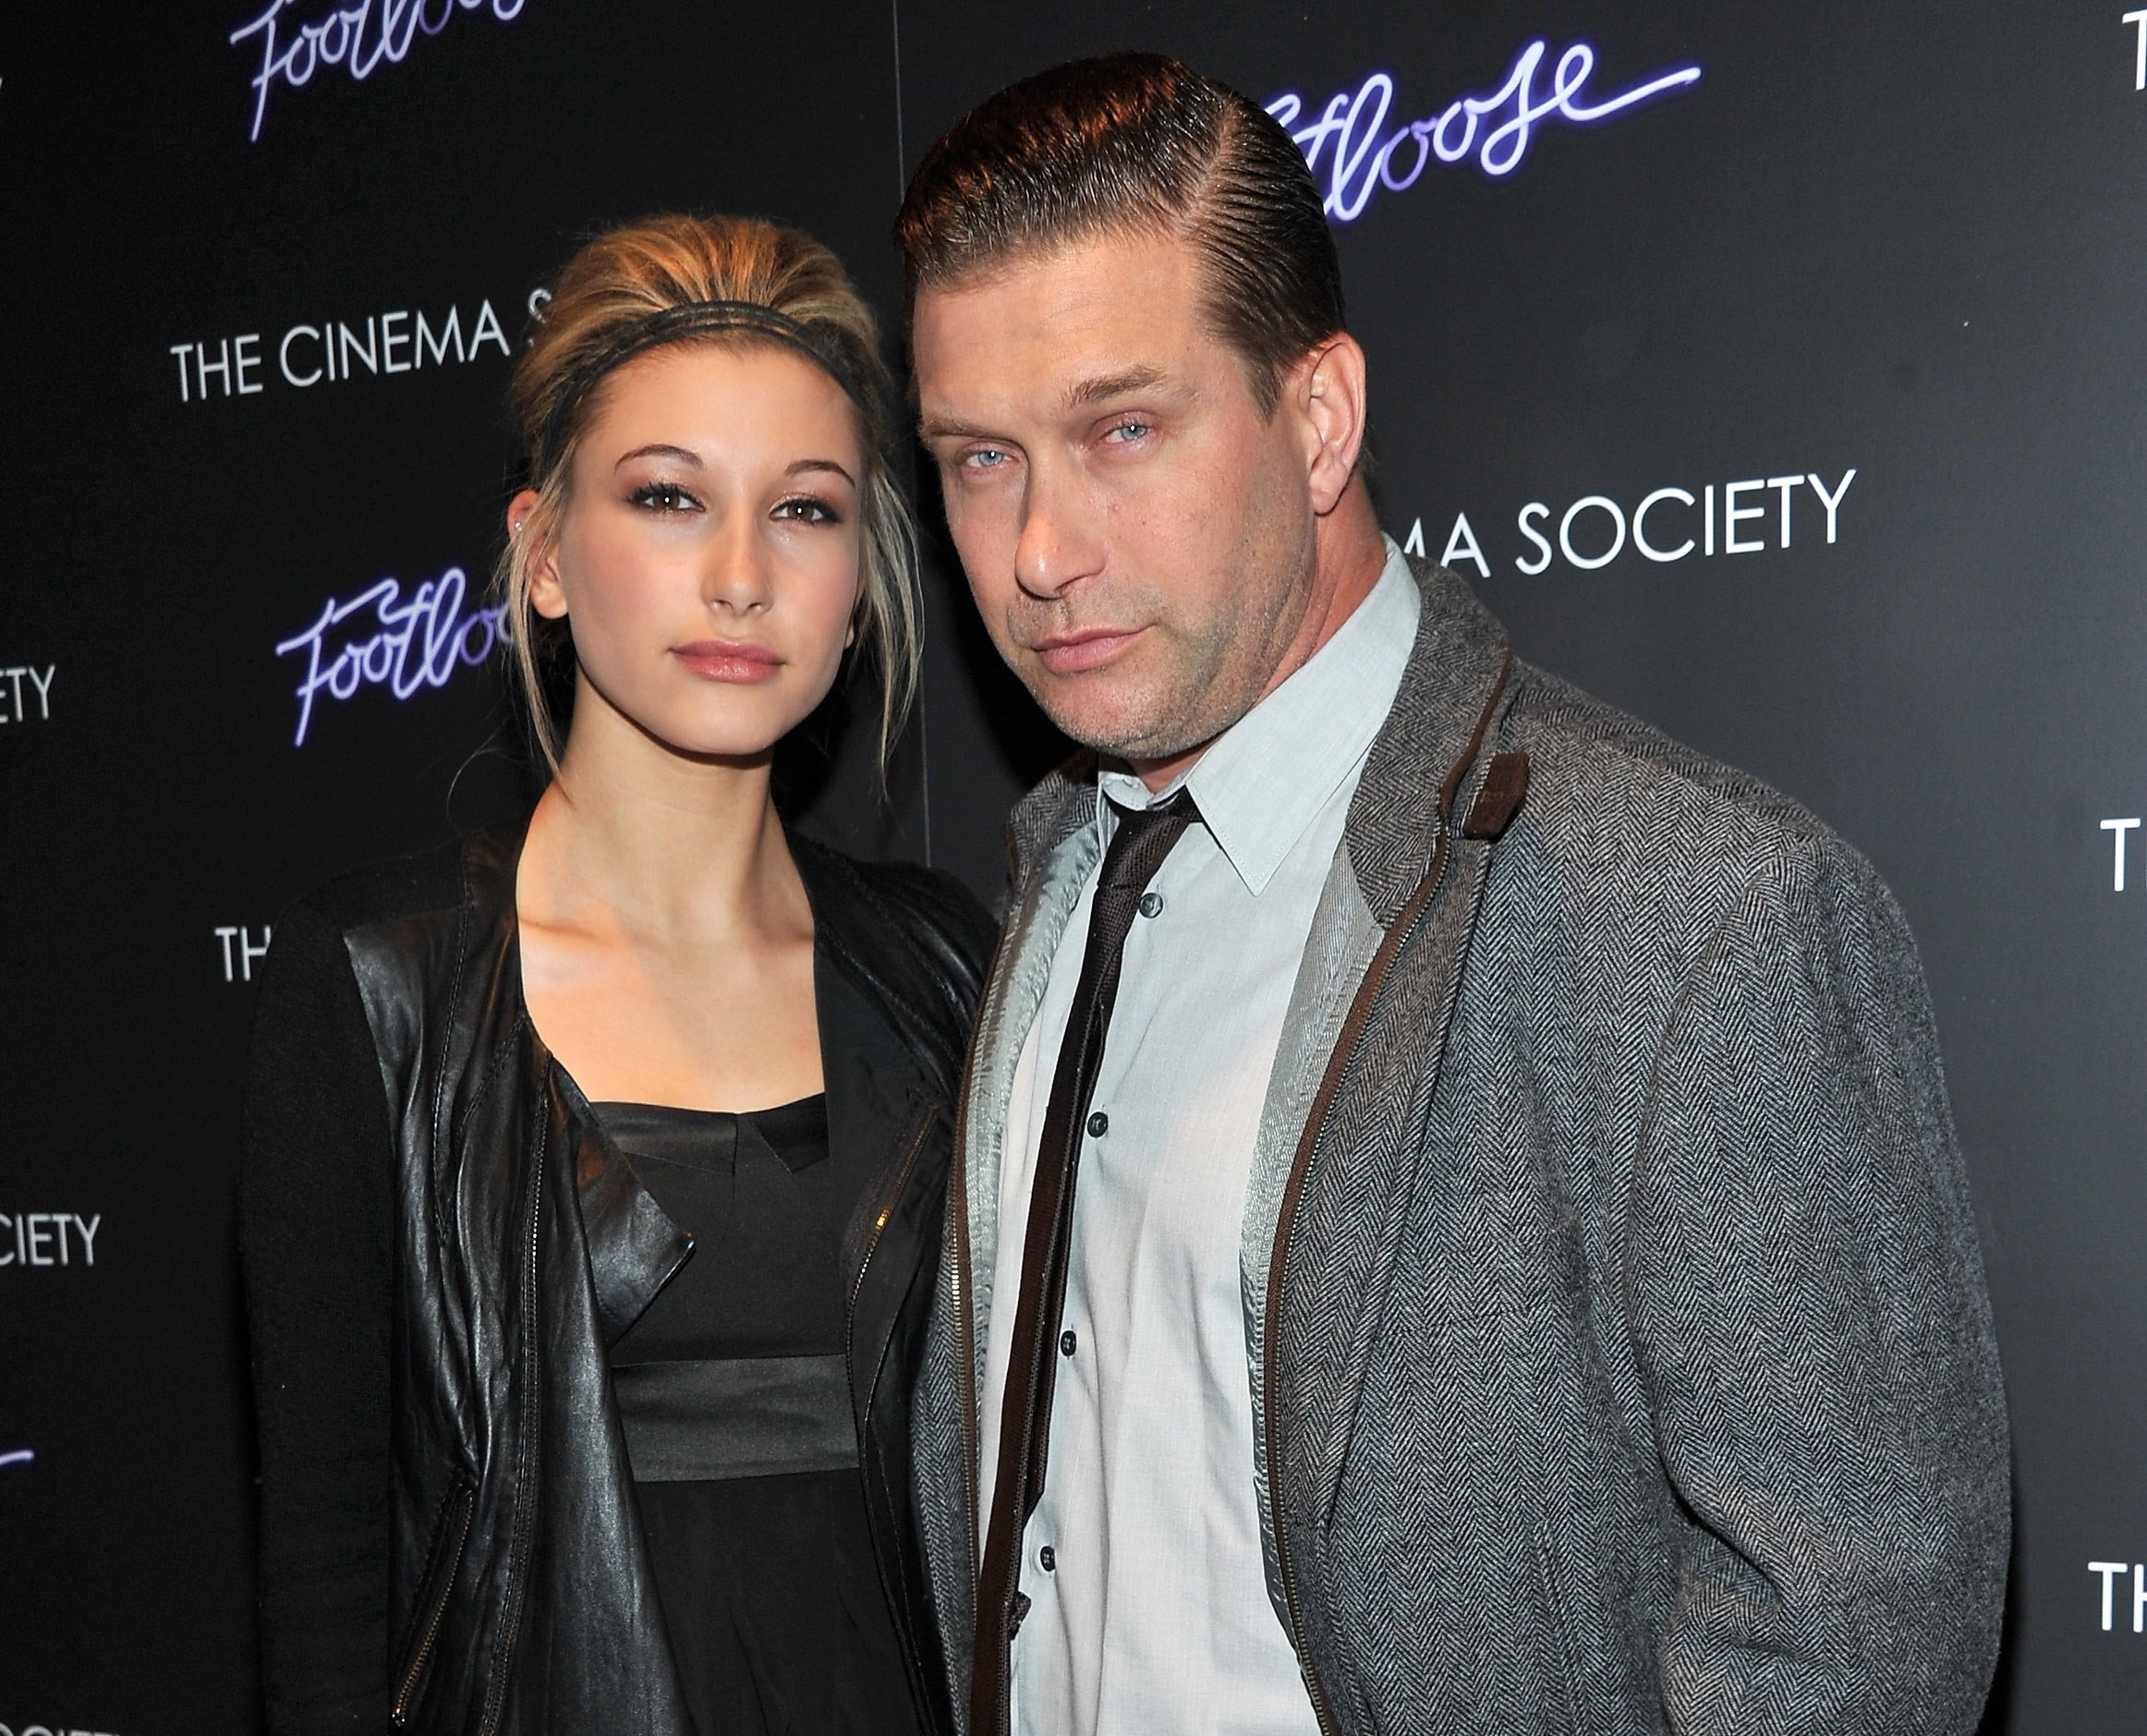 Hailey Baldwin and Stephen Baldwin attend the Cinema Society screening of "Footloose" at the Tribeca Grand Hotel